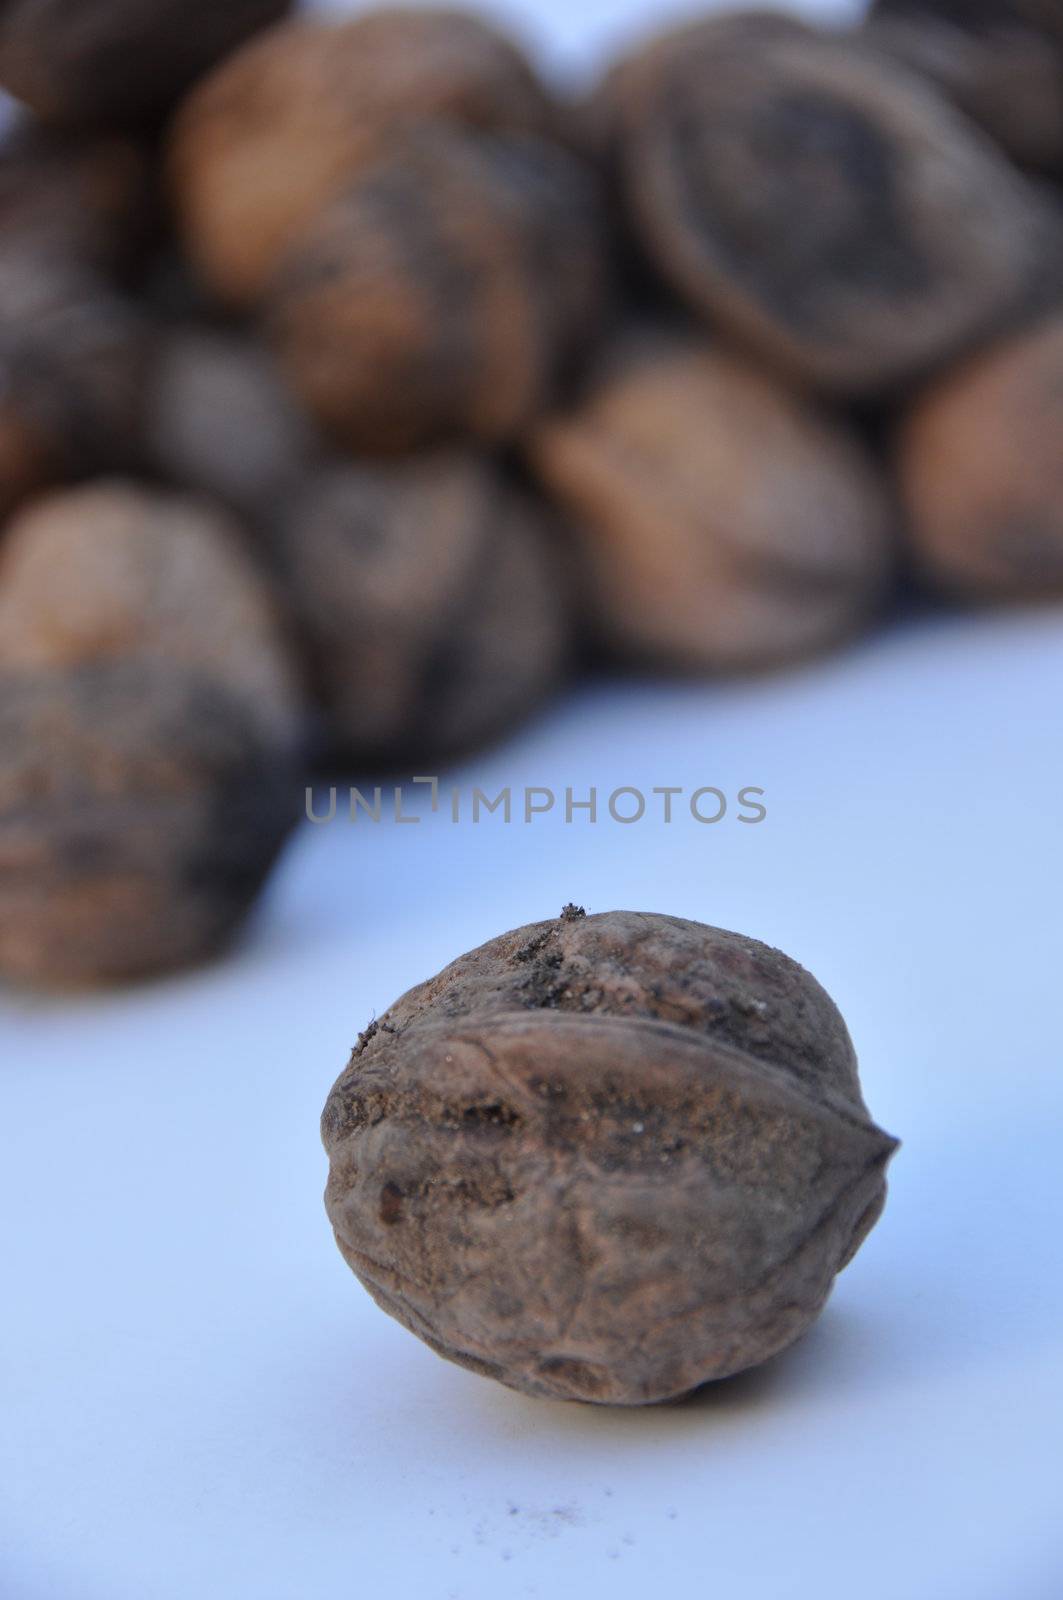 A big pile of nuts over white background